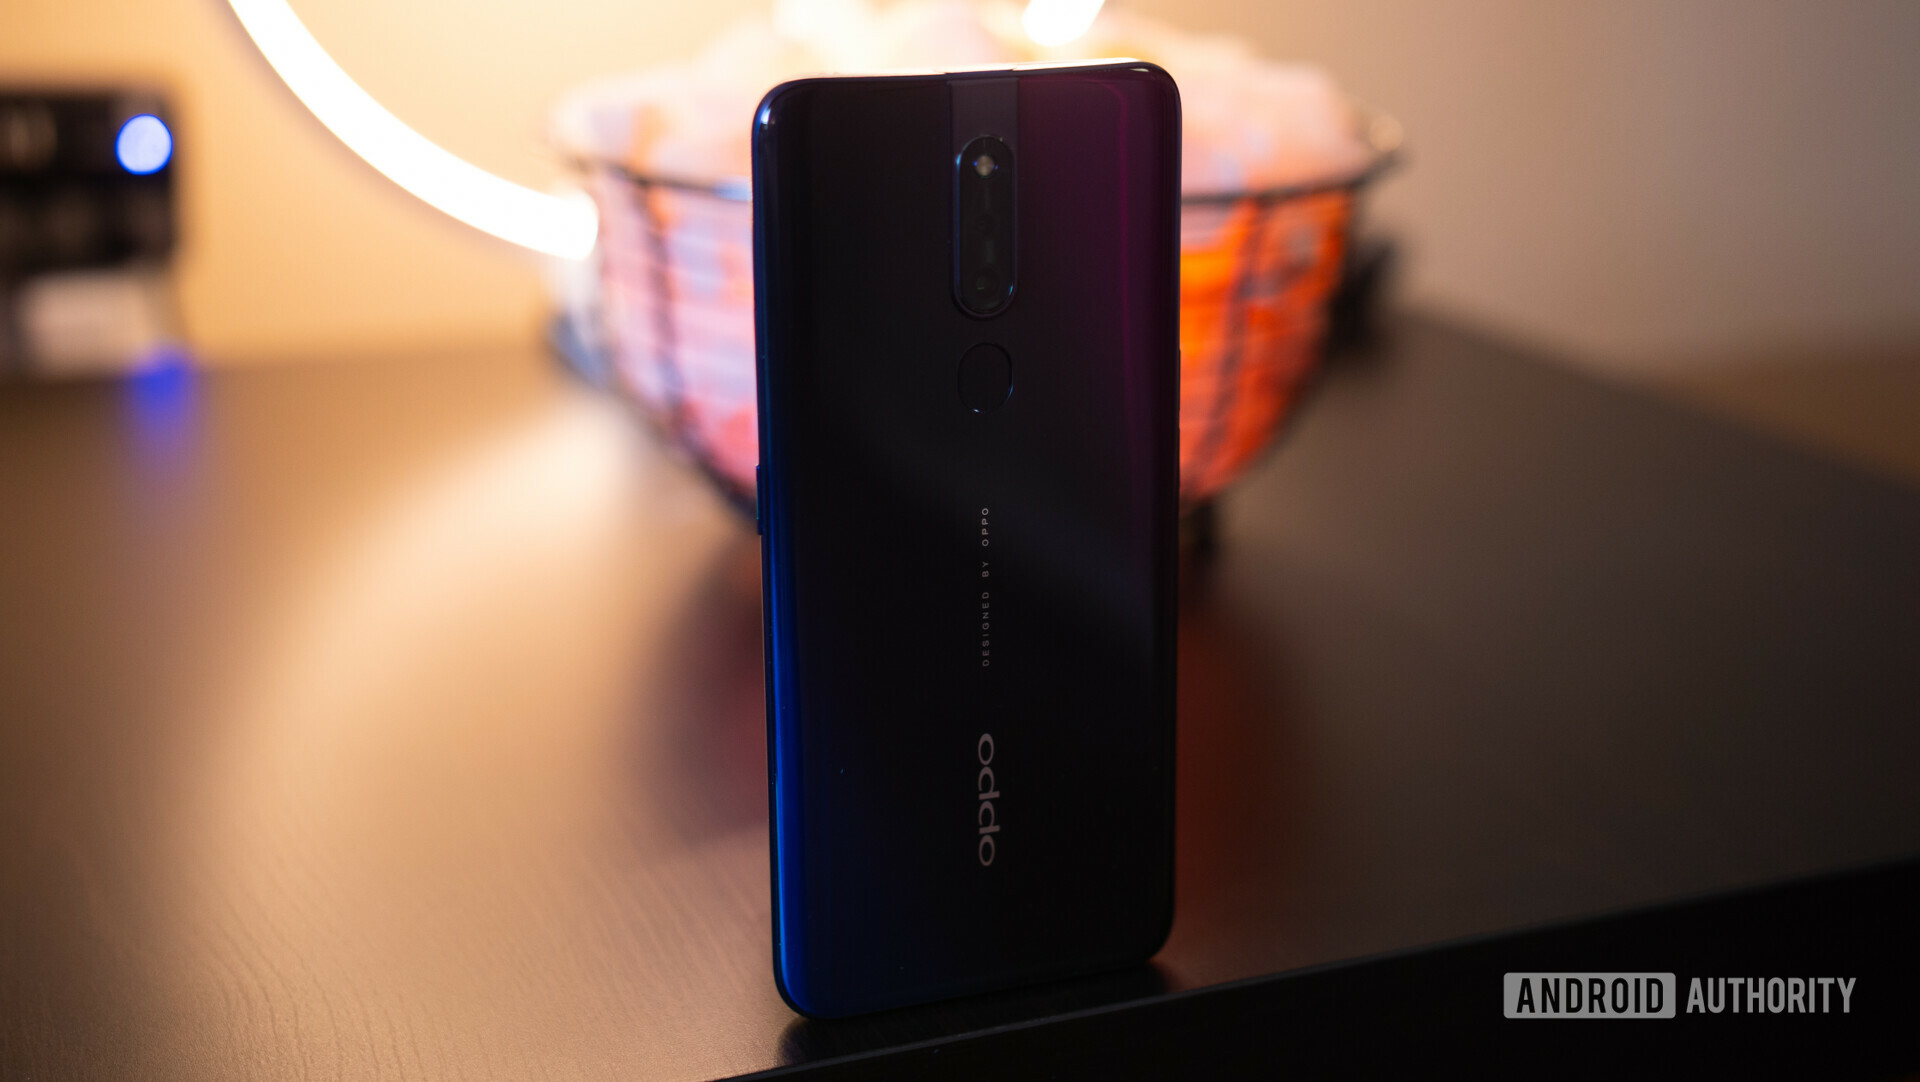 Back side view of the OPPO F11 Pro rear glass panle, standing upright on a table.